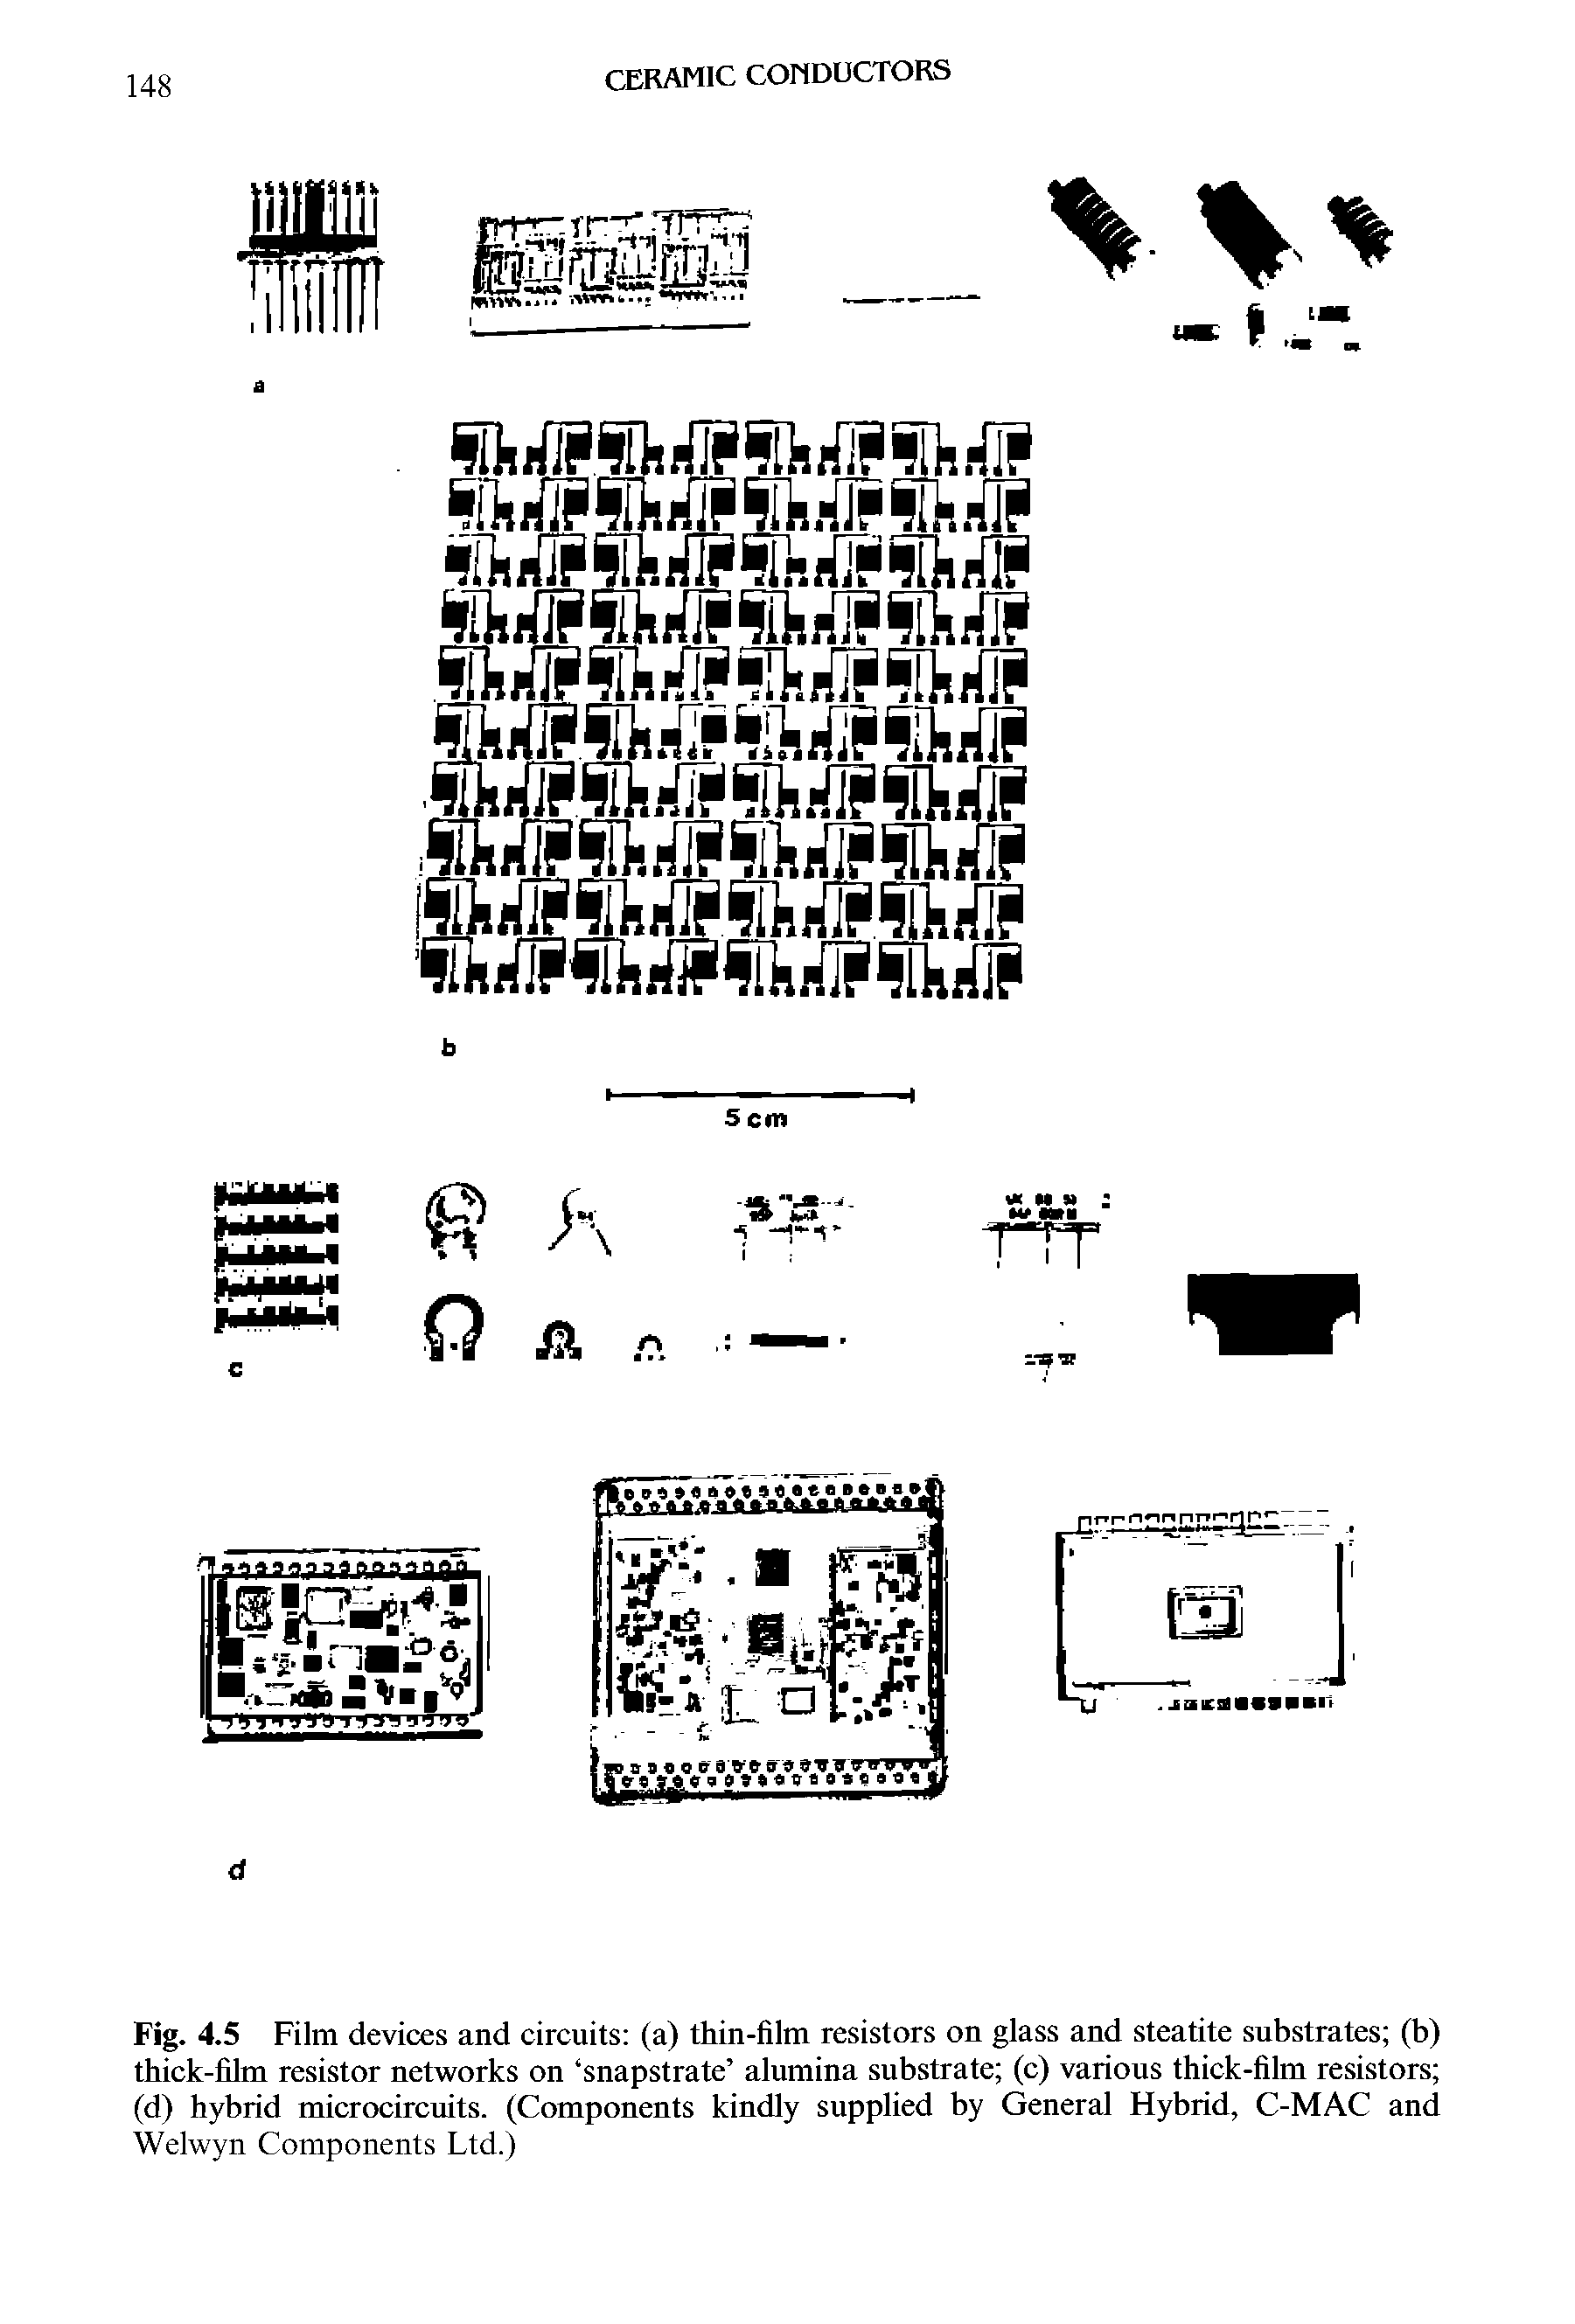 Fig. 4.5 Film devices and circuits (a) thin-film resistors on glass and steatite substrates (b) thick-film resistor networks on snapstrate alumina substrate (c) various thick-film resistors (d) hybrid microcircuits. (Components kindly supplied by General Hybrid, C-MAC and...